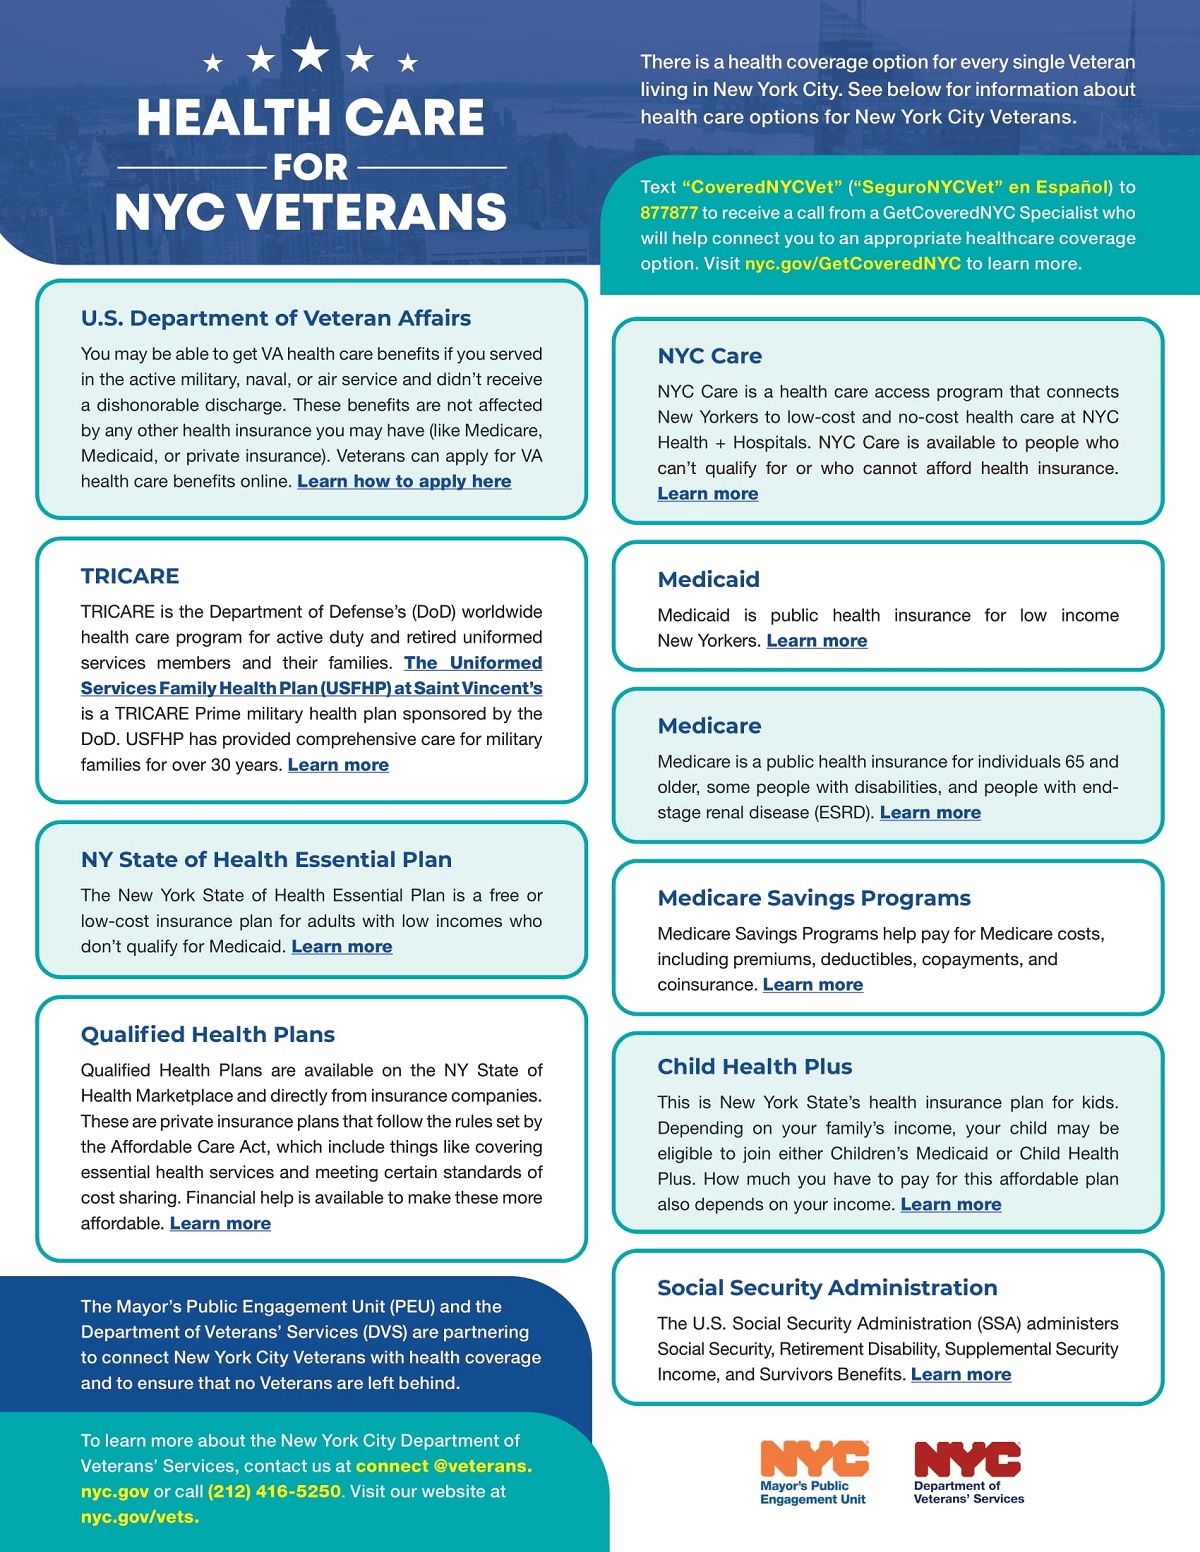 A flyer entitled Health Care for NYC Veterans with information about health care options for Veterans in NYC that reflect the information on this webpage.